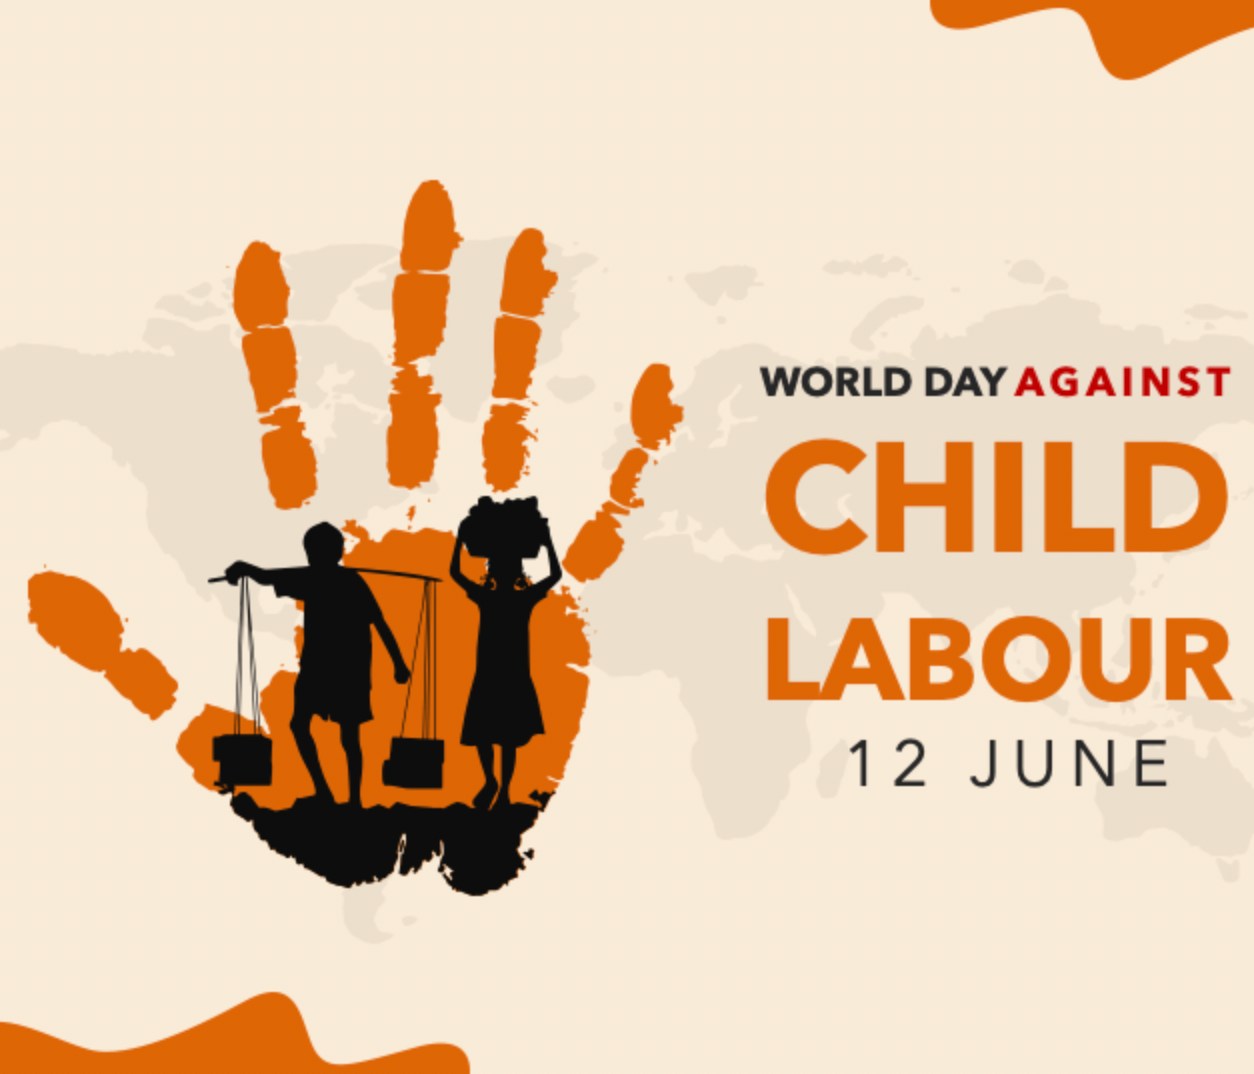 Combating Child Labour: Together Towards a Brighter Future